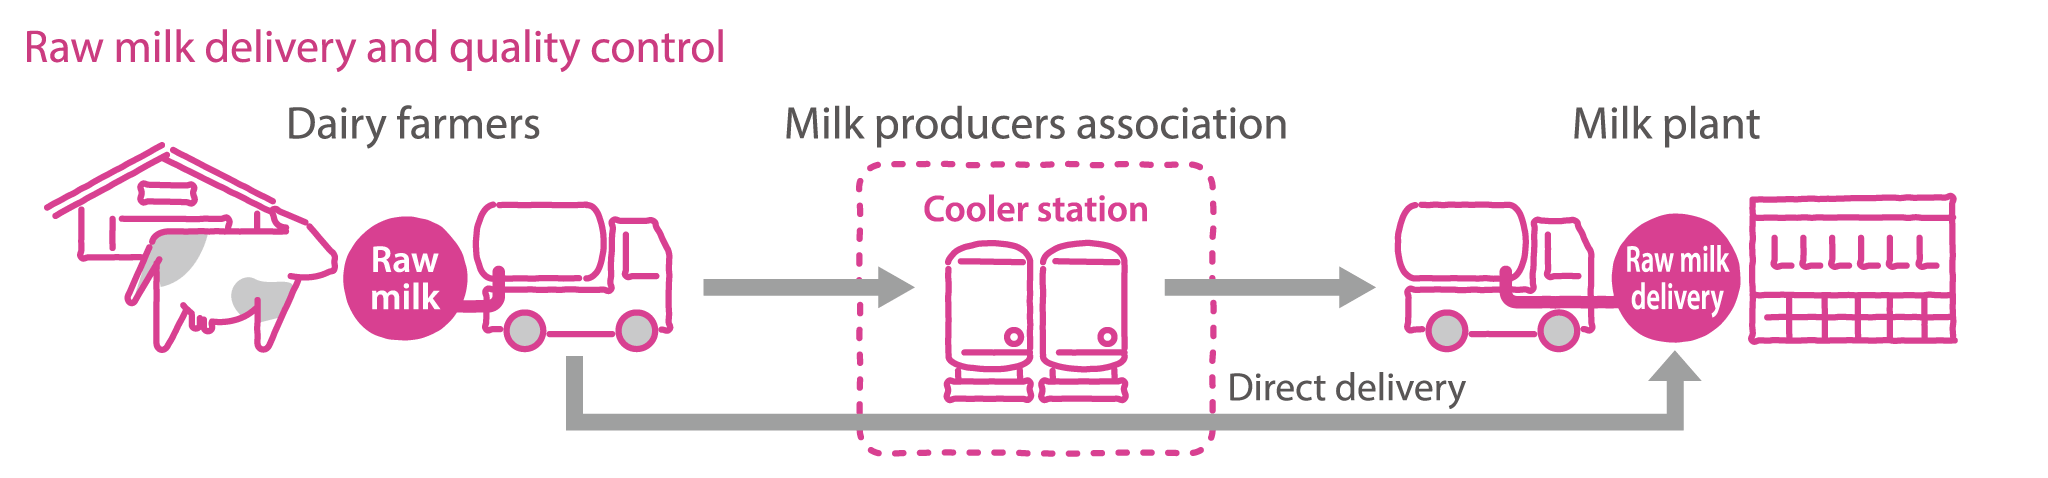 Figure: Raw milk delivery and quality control